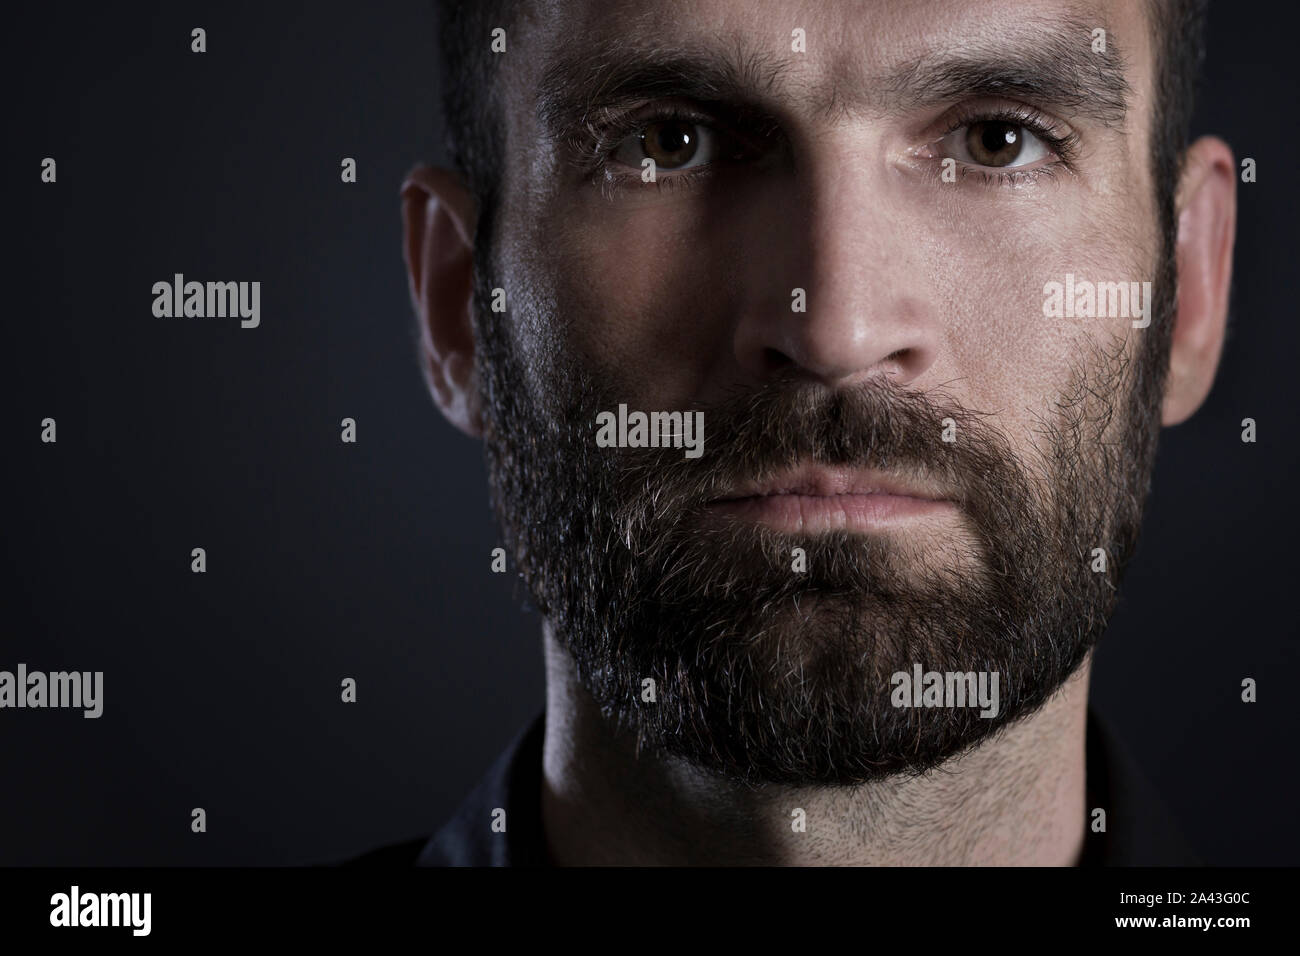 Close up of earnest looking man. Stock Photo